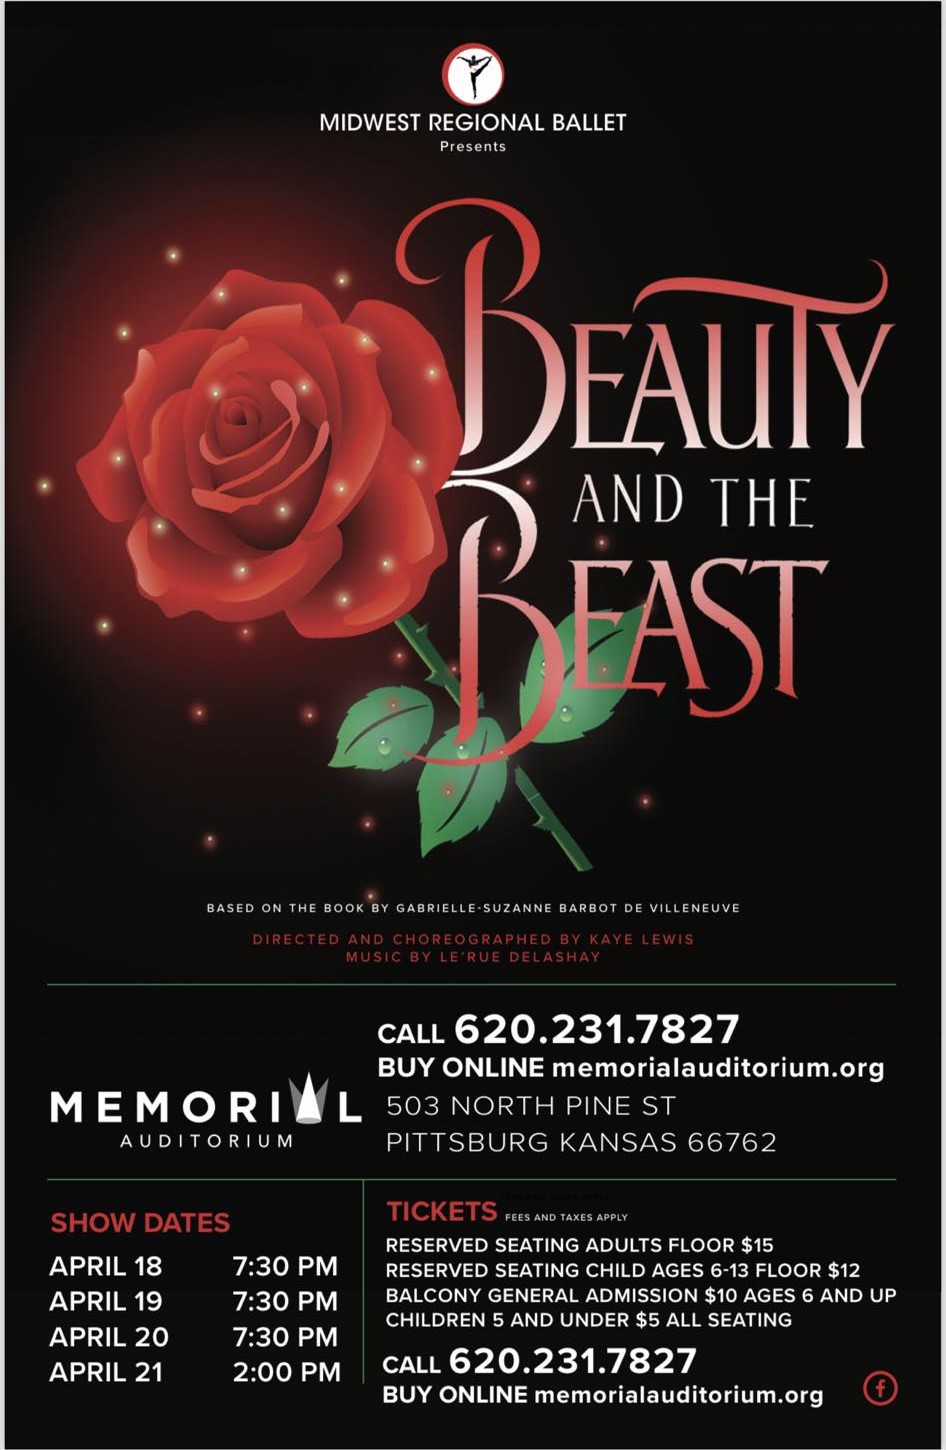 Midwest Regional Ballet Presents “Beauty and the Beast”